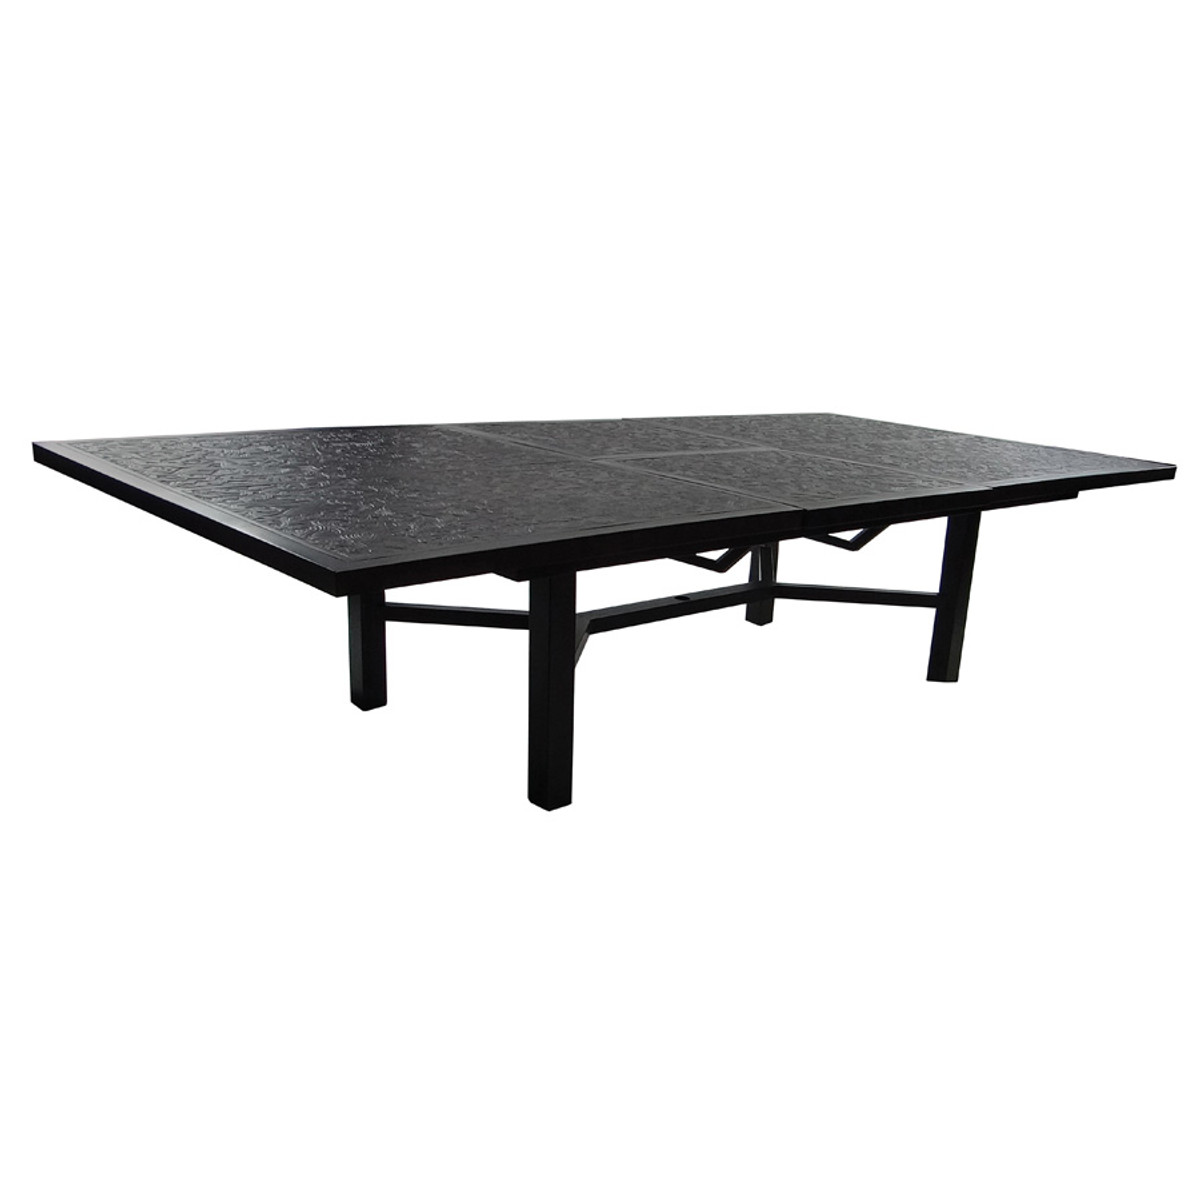 90″ CLASSICAL RECTANGULAR EXTENSION DINING TABLE